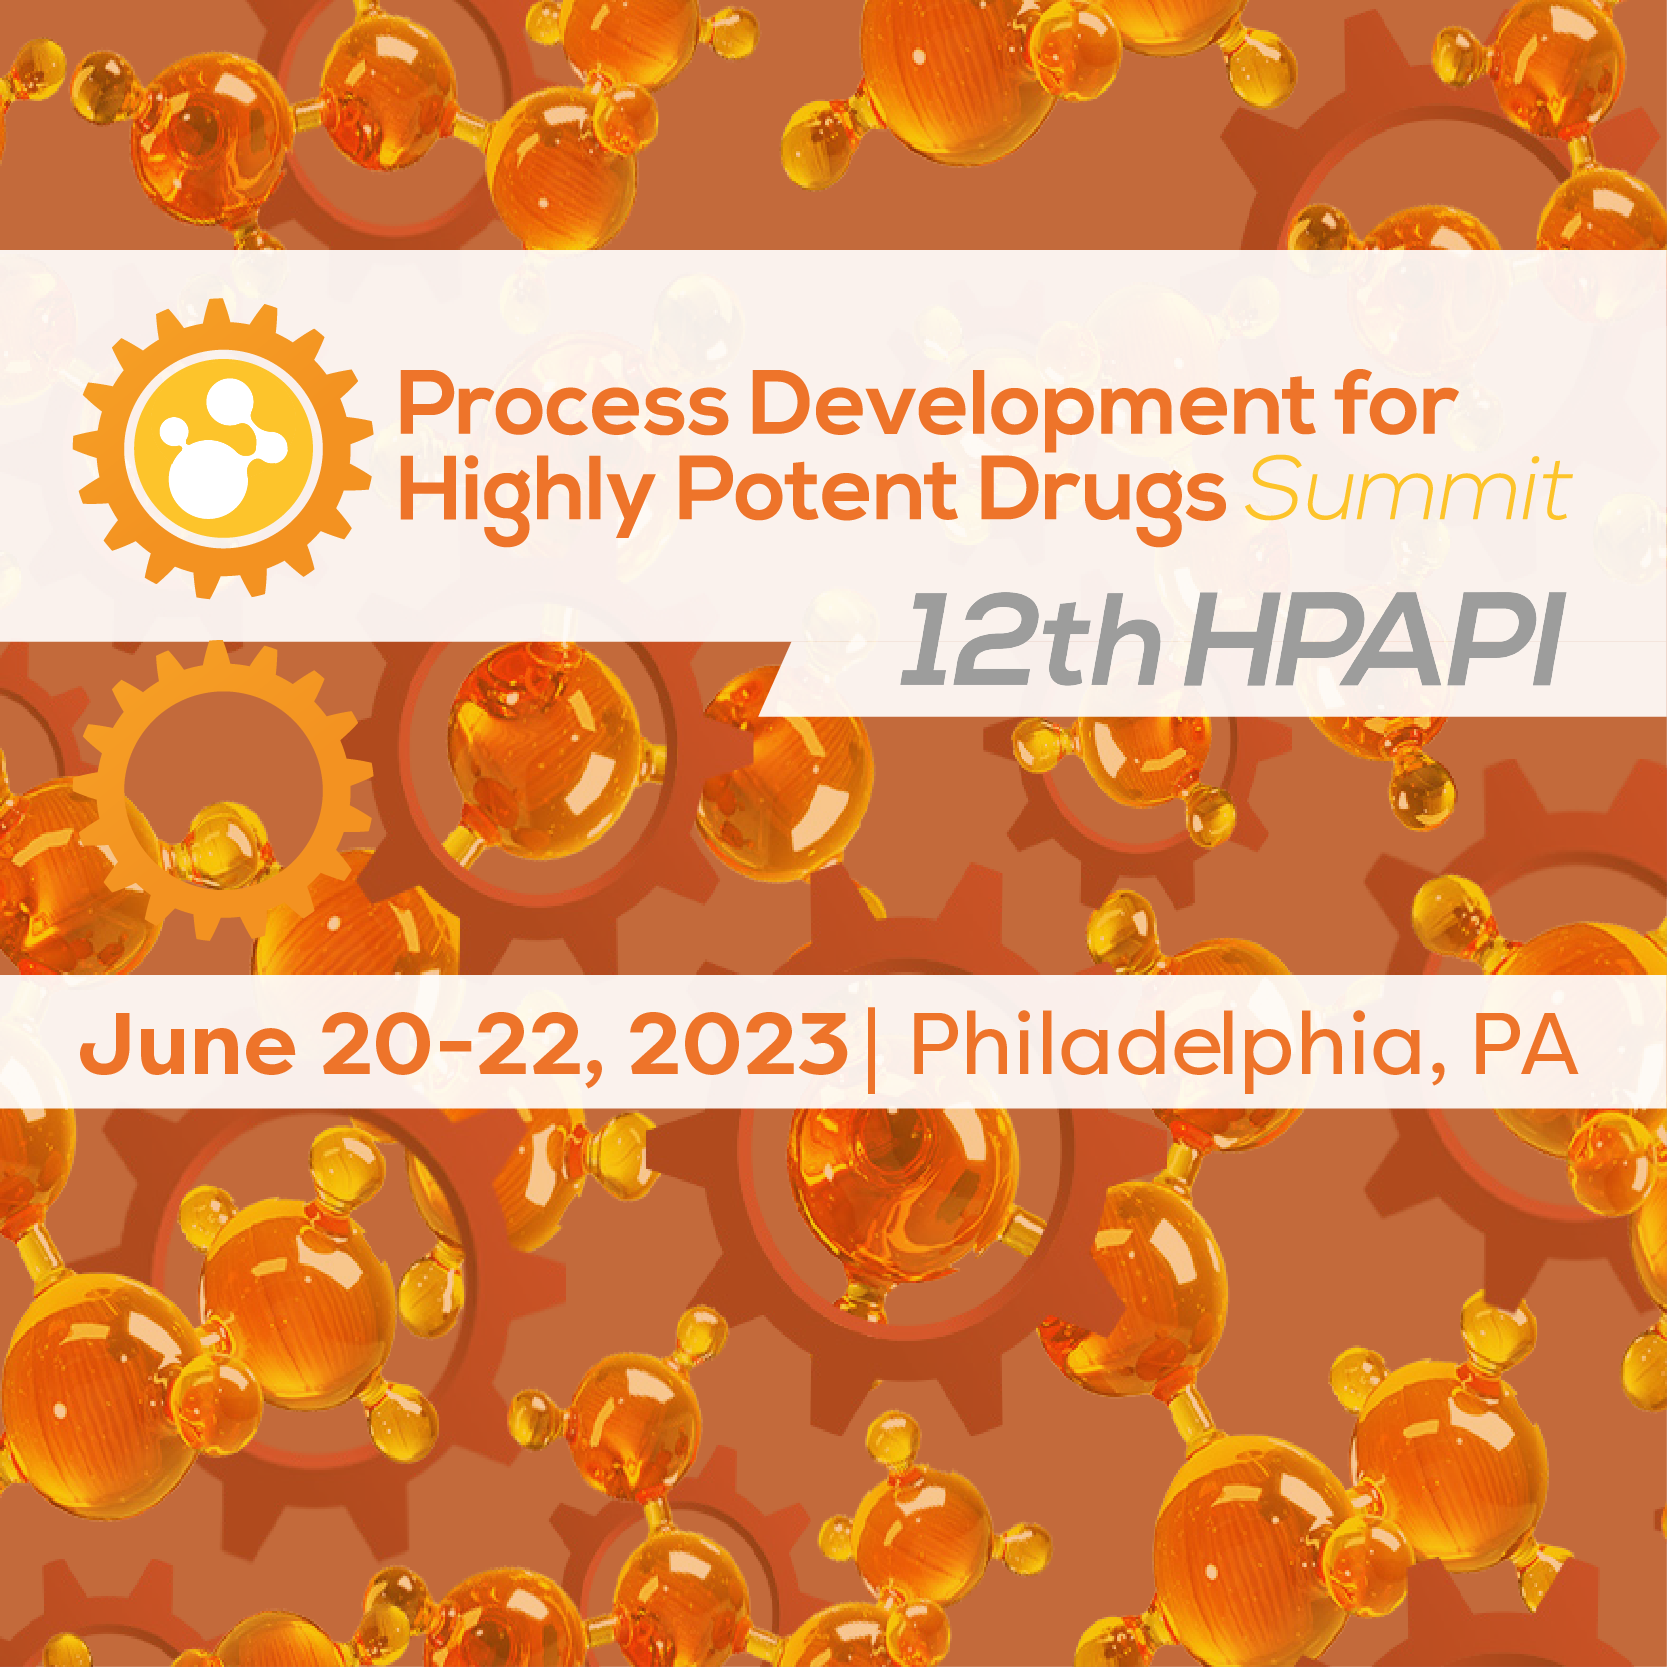 12th HPAPI: Process Development for Highly Potent Drugs 2023